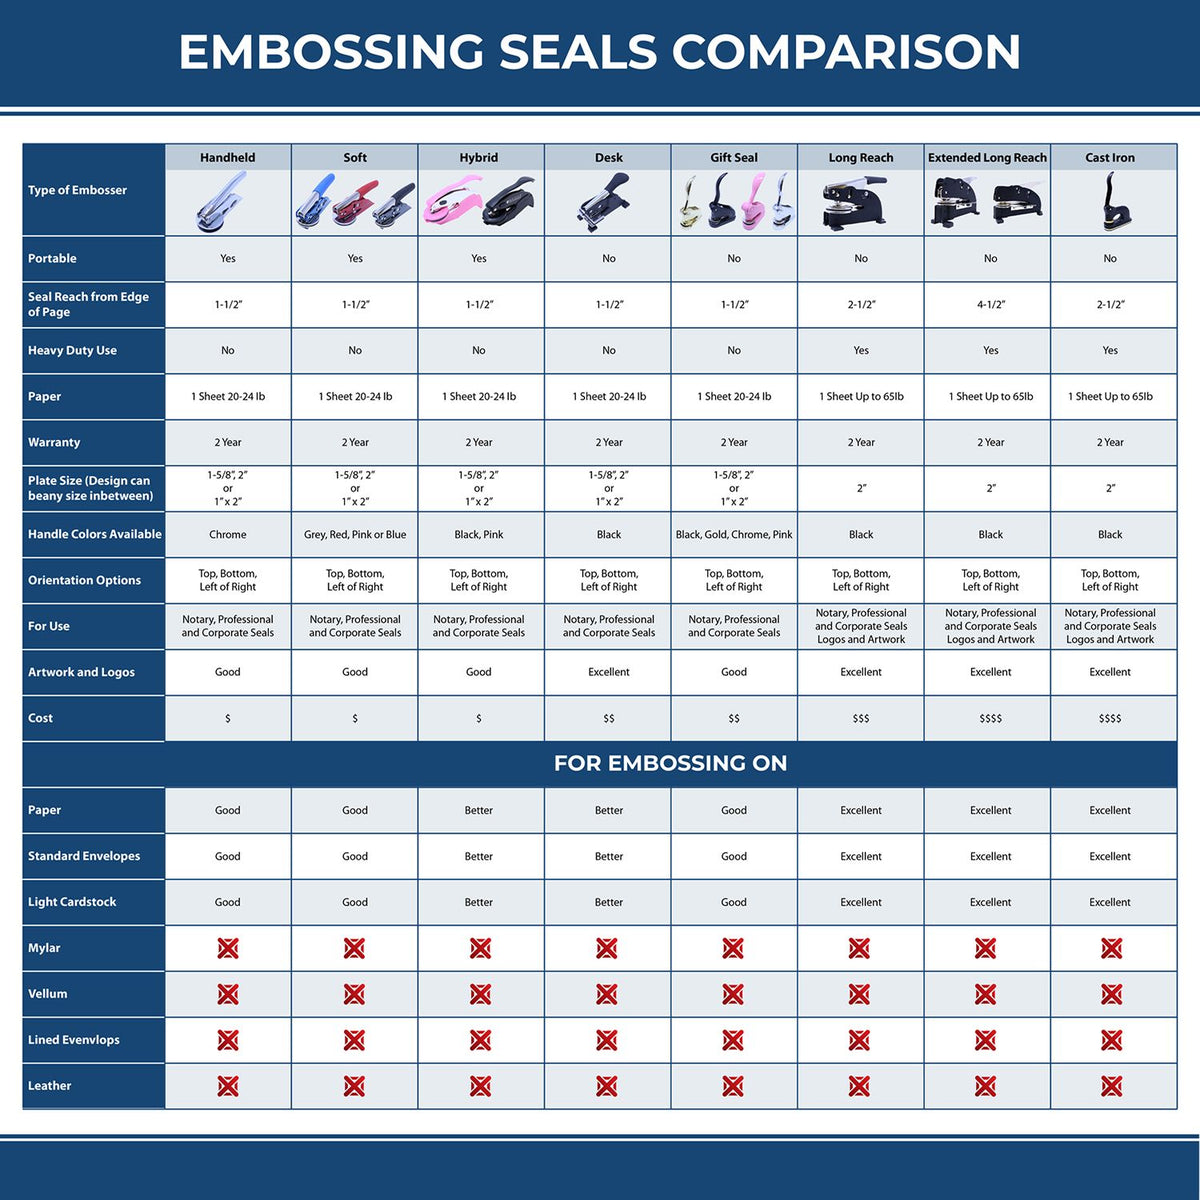 A comparison chart for the different types of mount models available for the Hybrid Georgia Engineer Seal